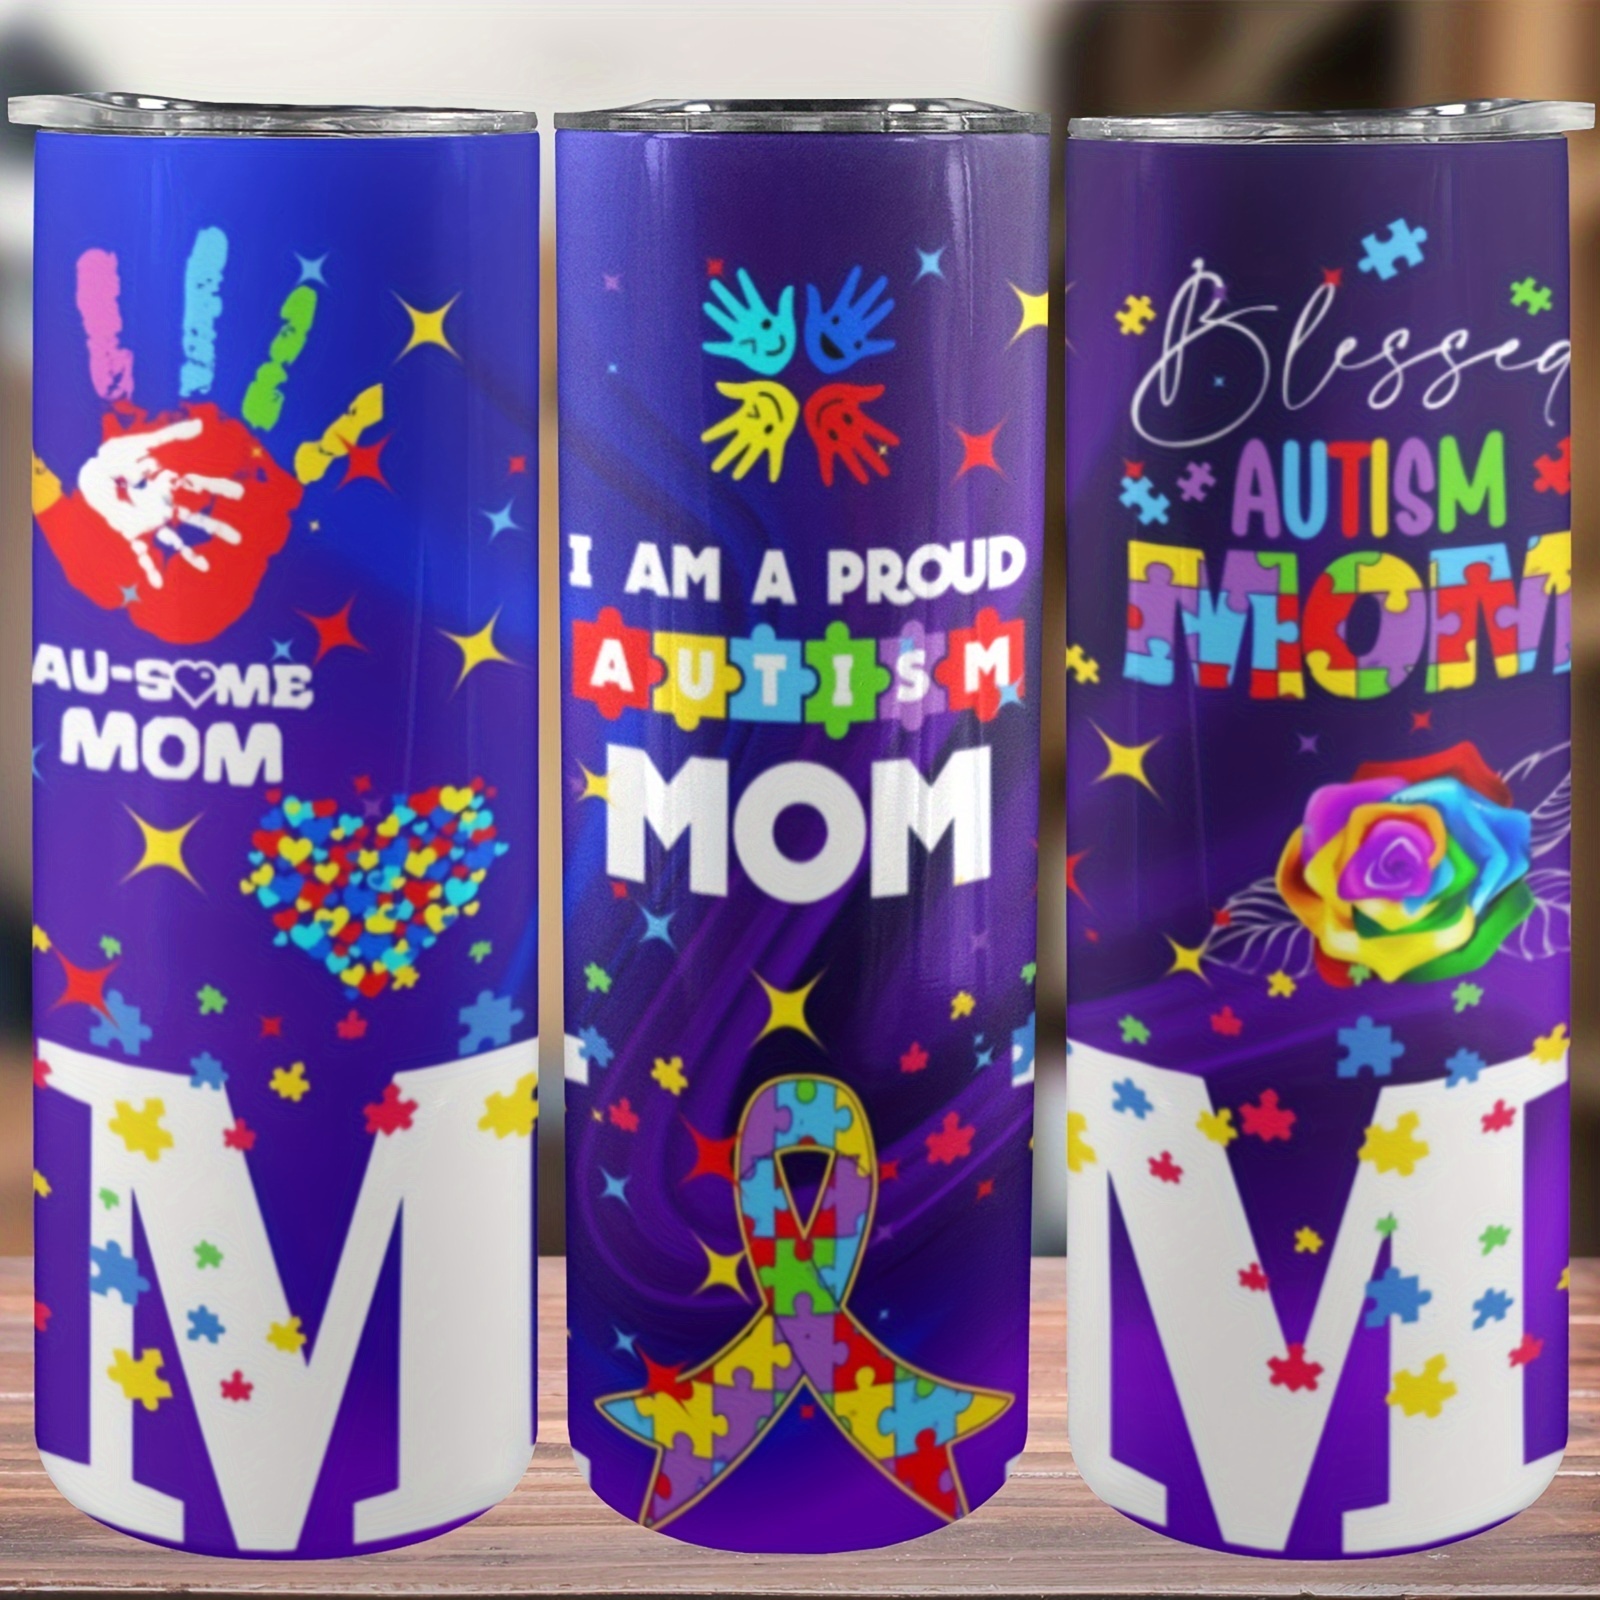 

20oz Autism Mom Insulated Stainless Steel Tumbler With Lid - Perfect Gift For Friends, Double-wall Travel Mug, Hand Wash Only